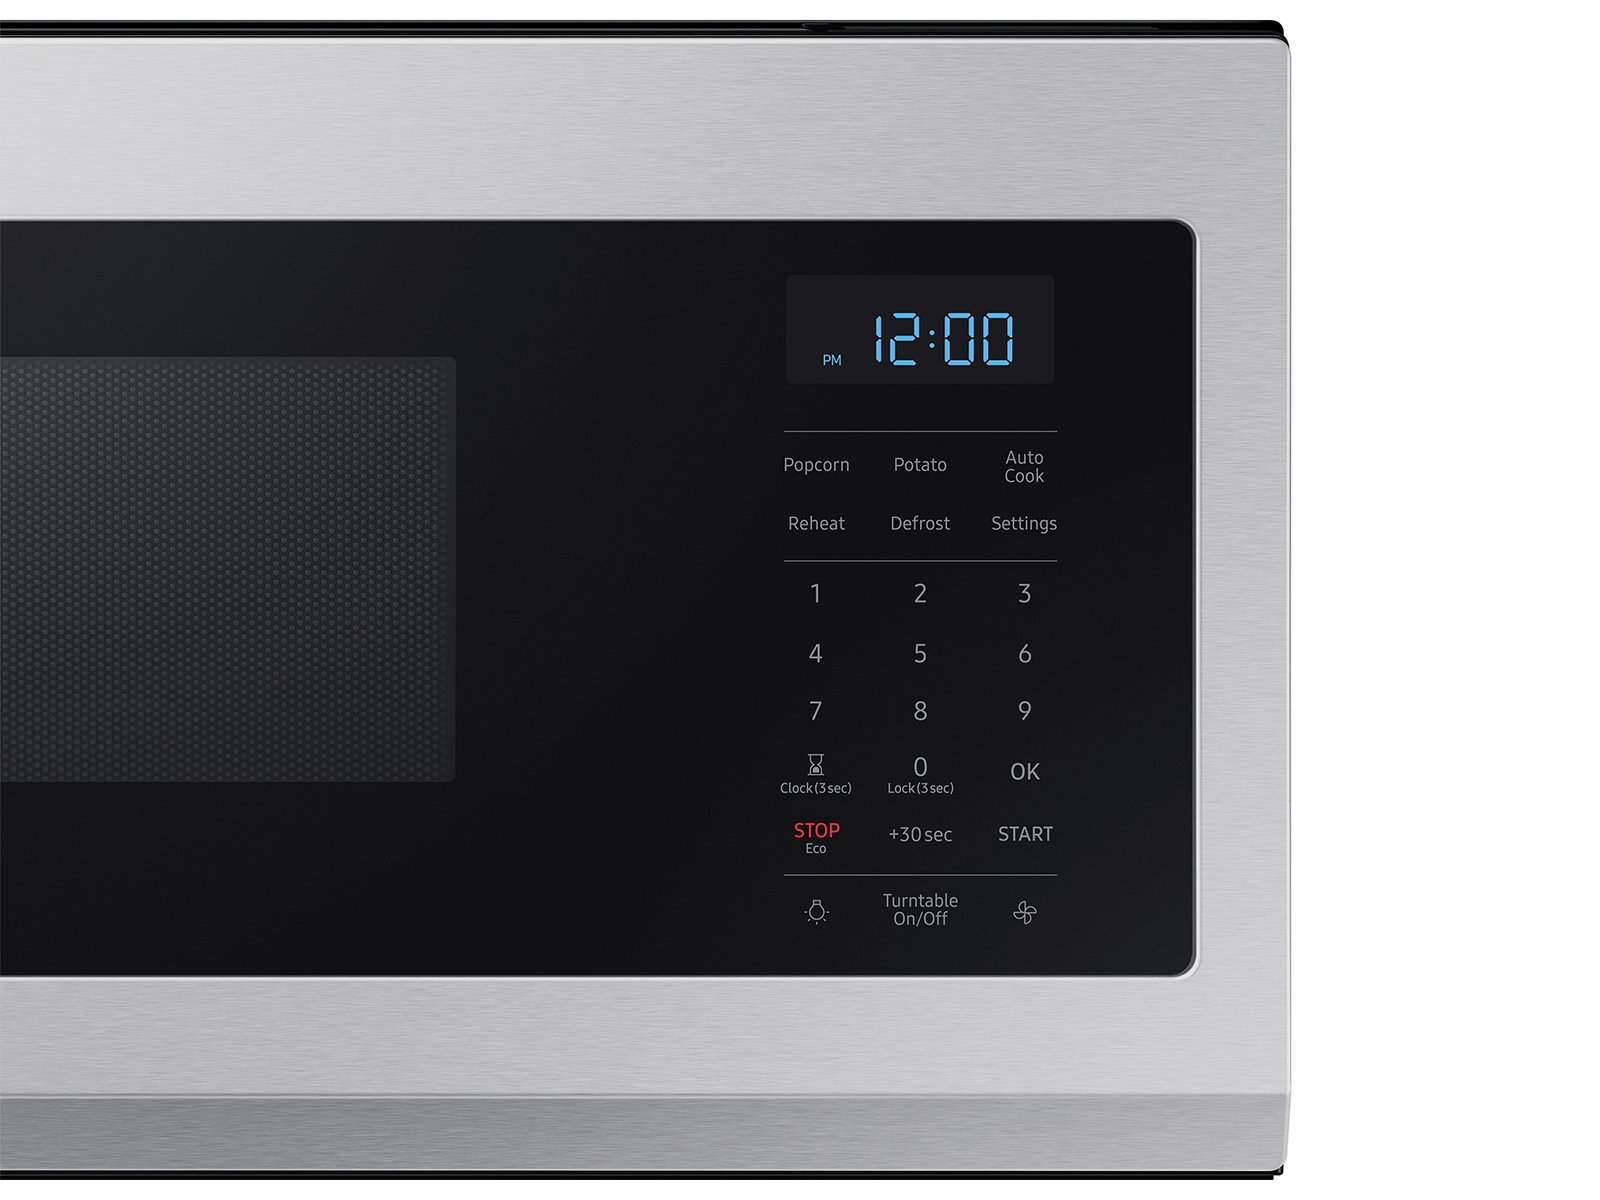 Samsung - 1.1 Cu. ft. Smart Slim Over-the-range Microwave with 400 CFM Hood Ventilation, Wi-Fi & Voice Control - Black Stainless Steel